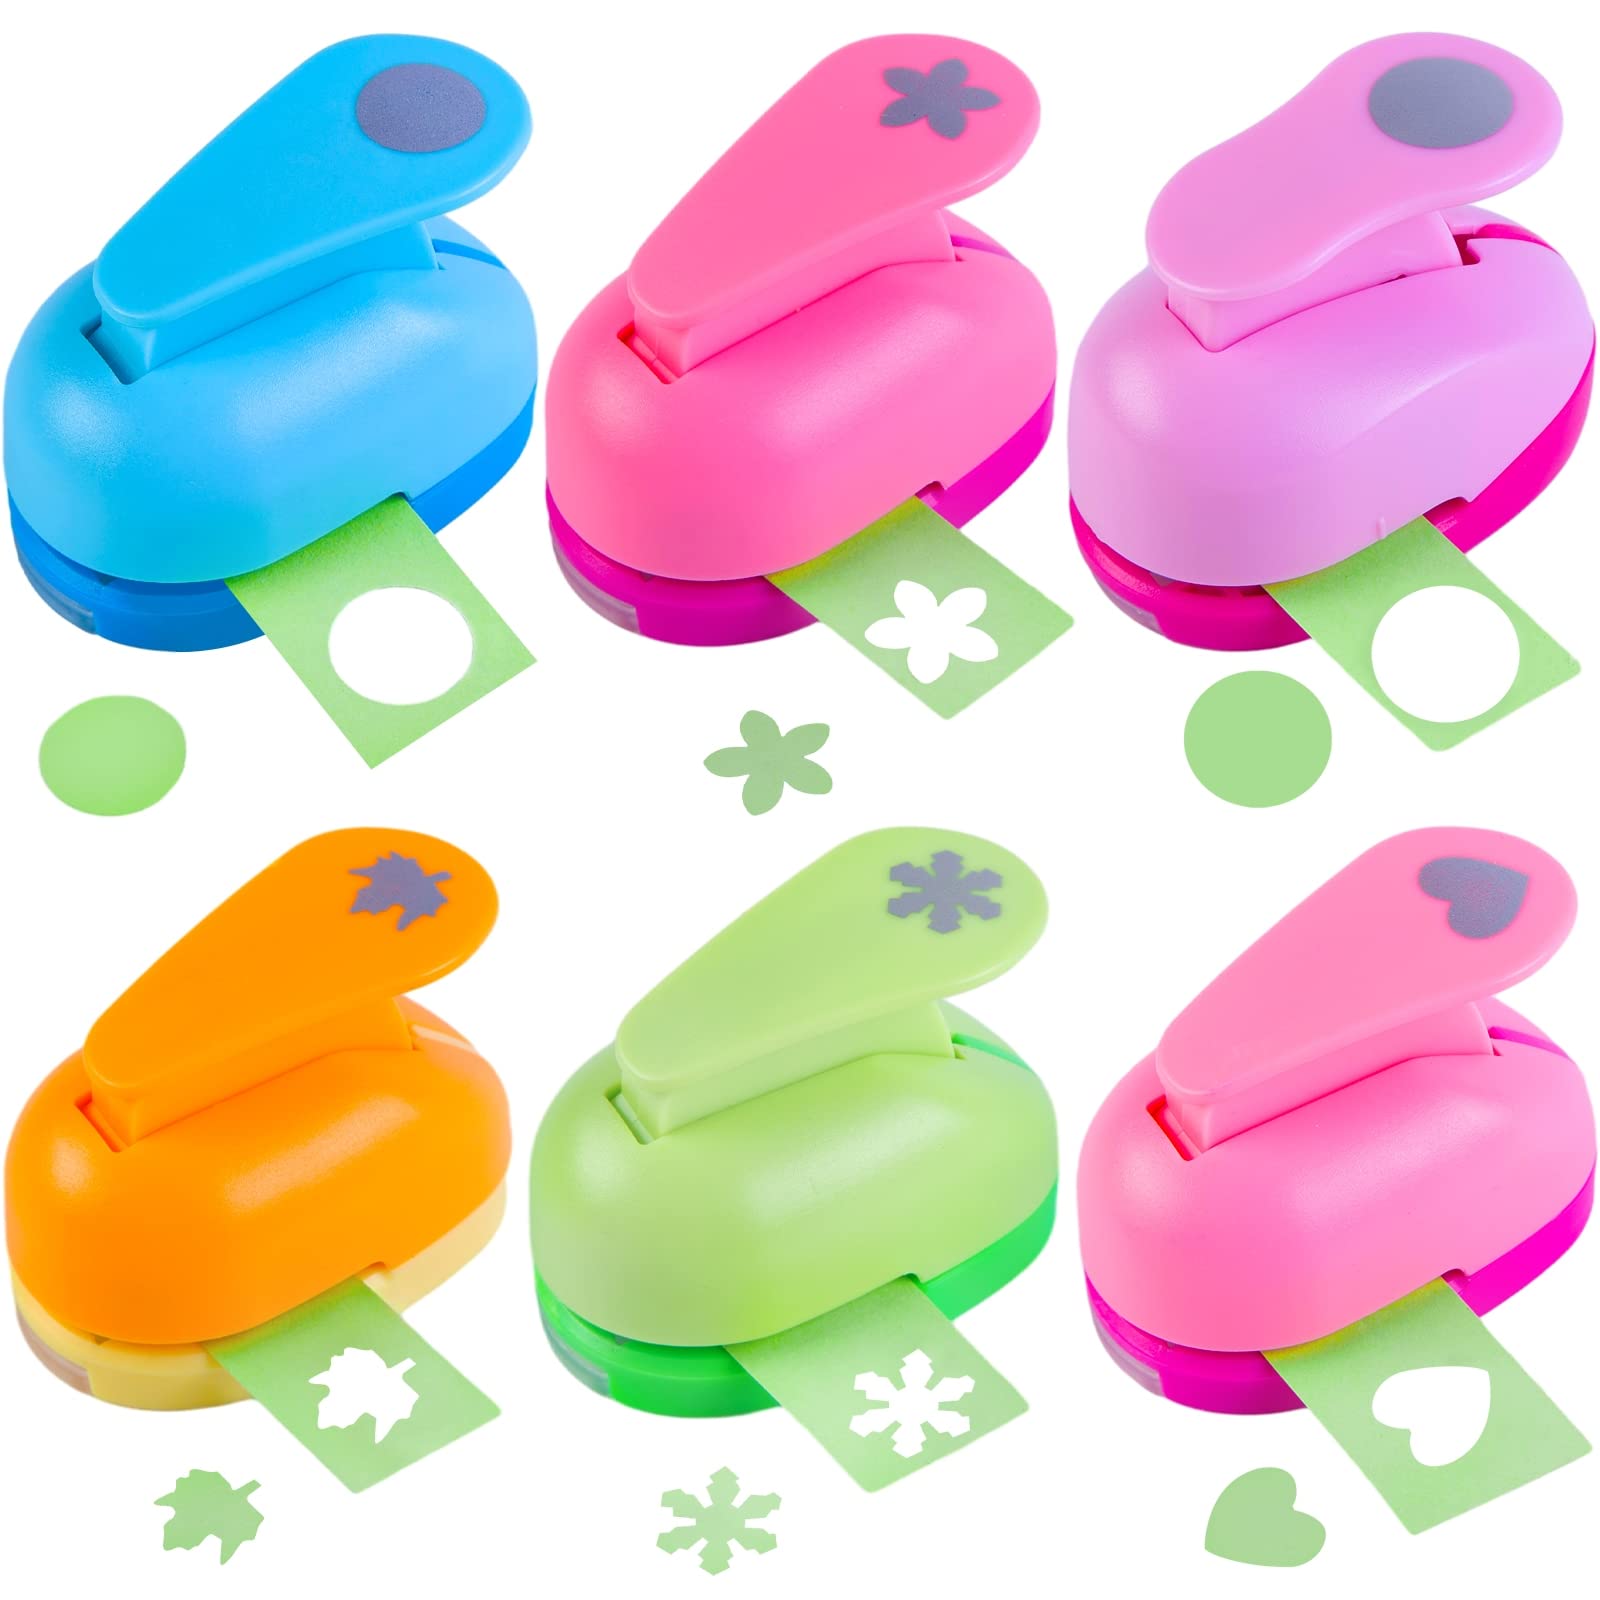  Hole Puncher - Paper Punches for Crafting, Hole Punch Shapes,  Star Hole Puncher, Hole Puncher for Crafts, Craft Supplies : Arts, Crafts &  Sewing